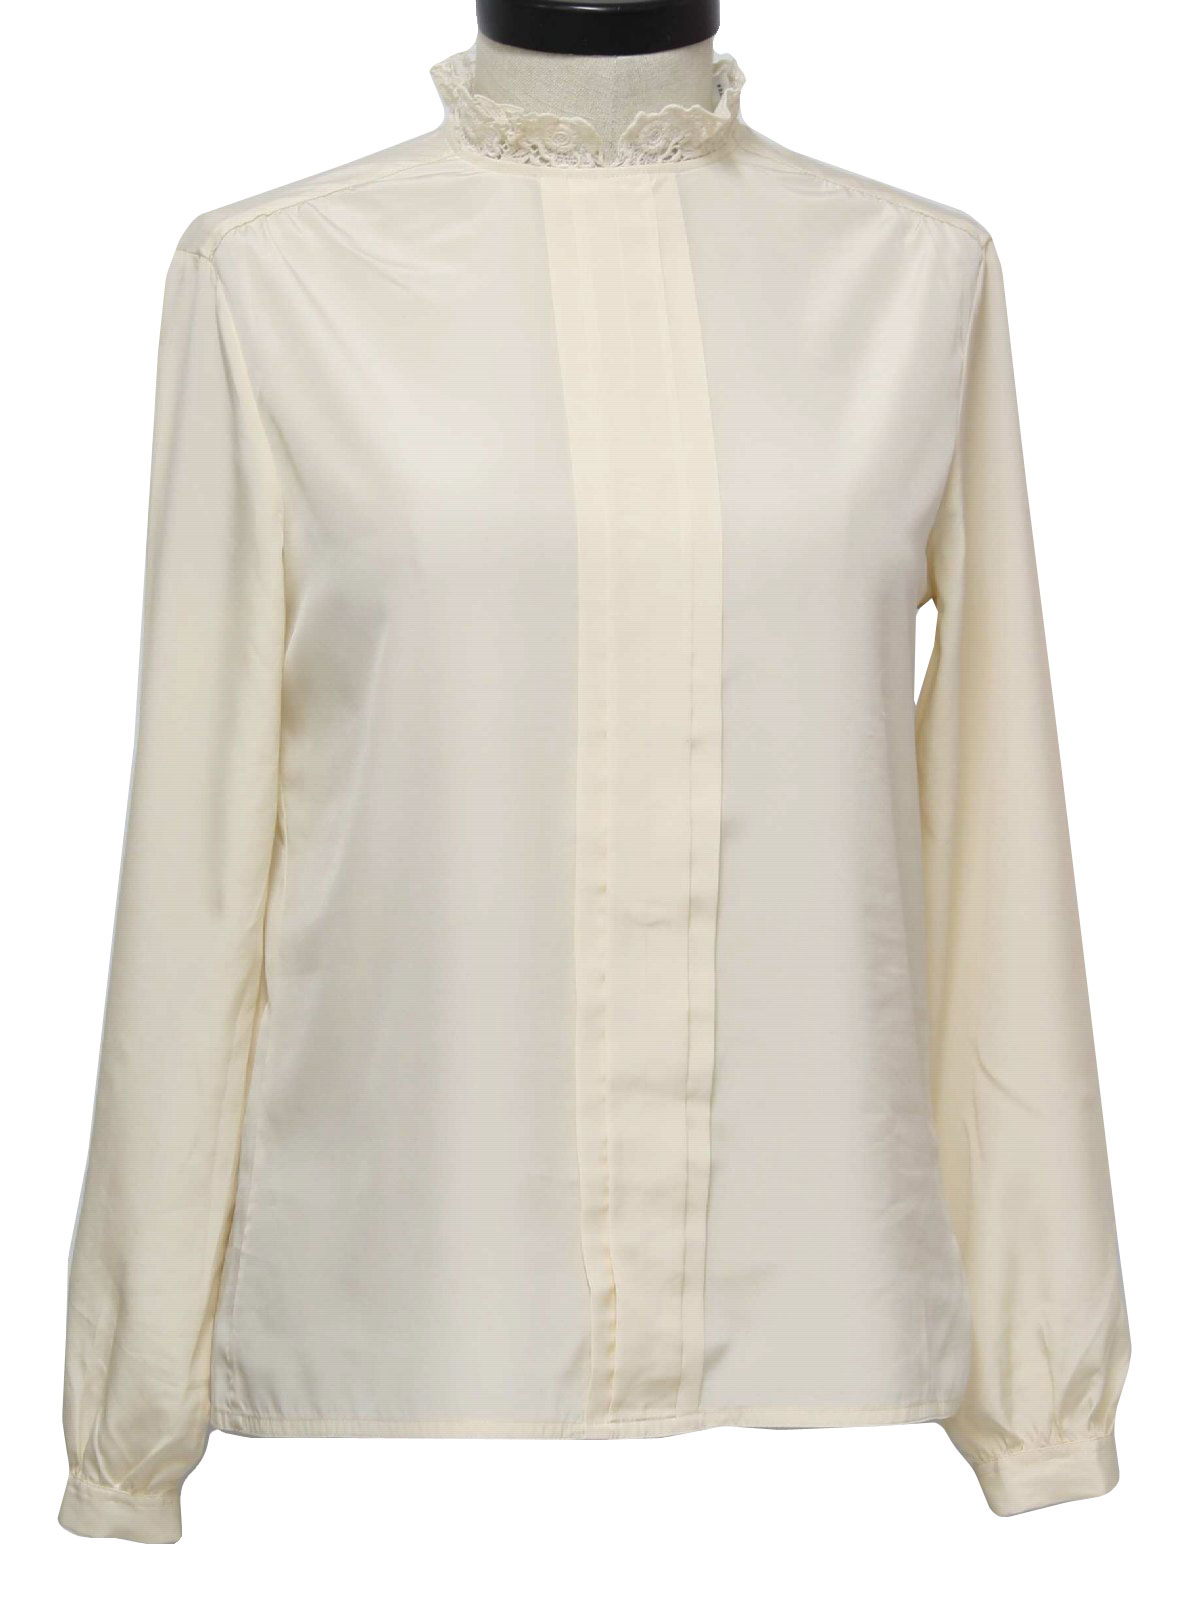 Vintage 1980's Shirt: 80s -Chaus- Womens cream silky polyester ...